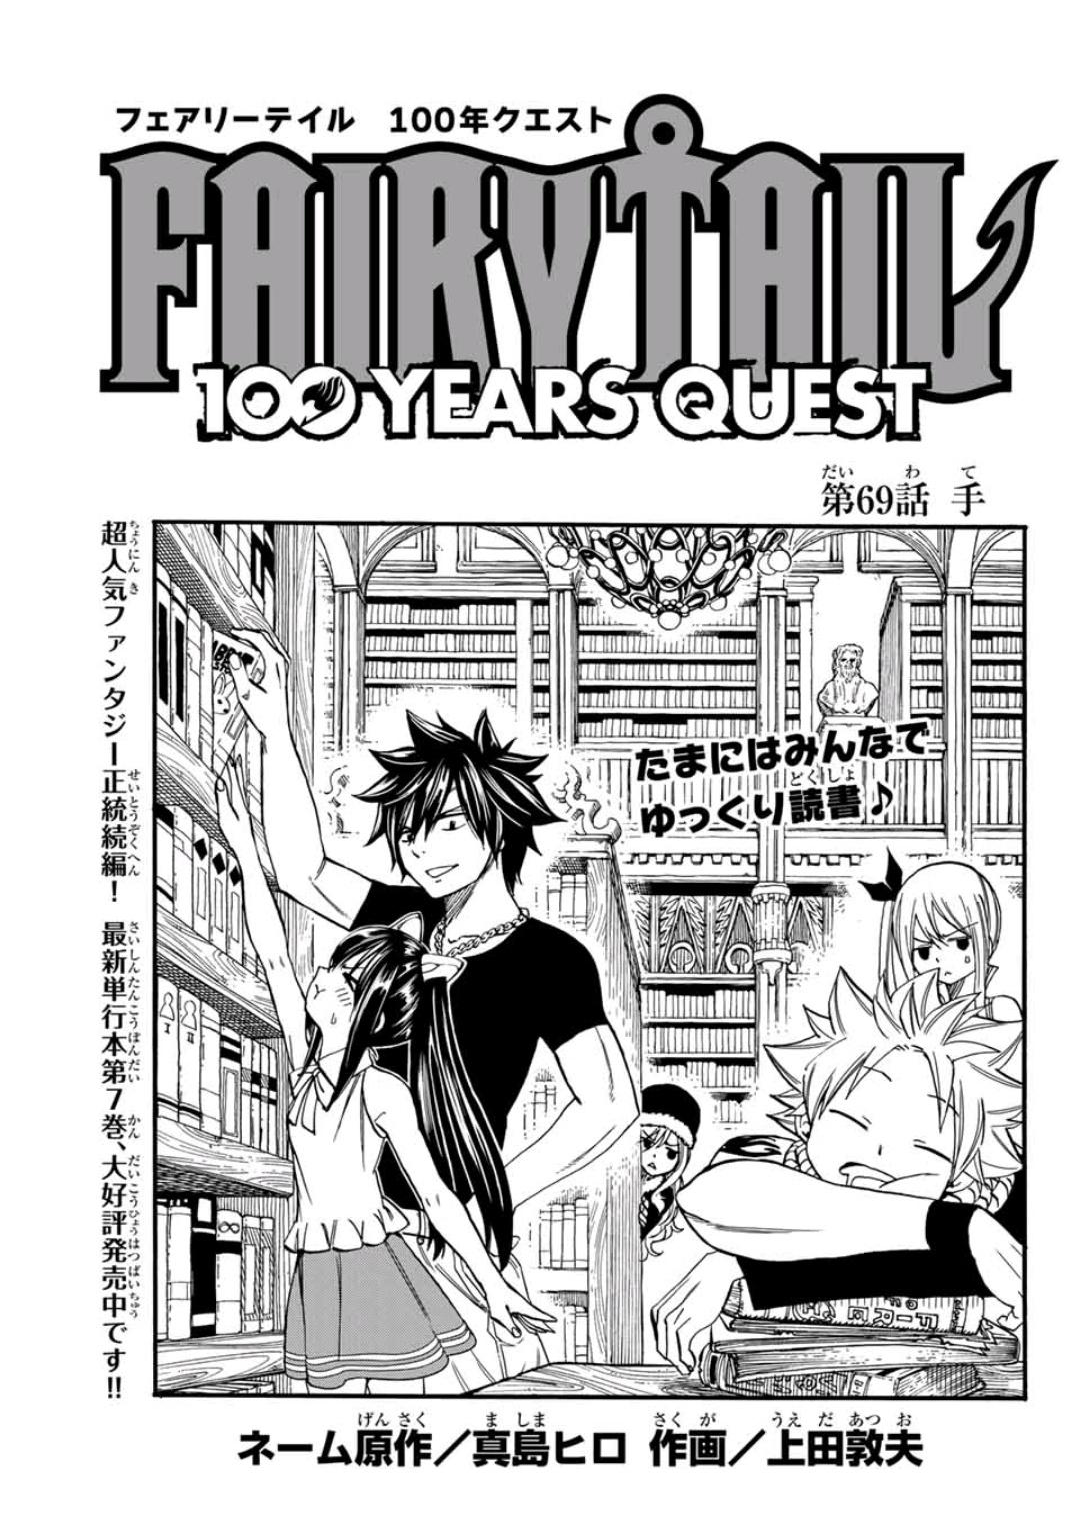 Fairy Tail 100 Years Quest Chapter 69 Fairy Tail Wiki Fandom